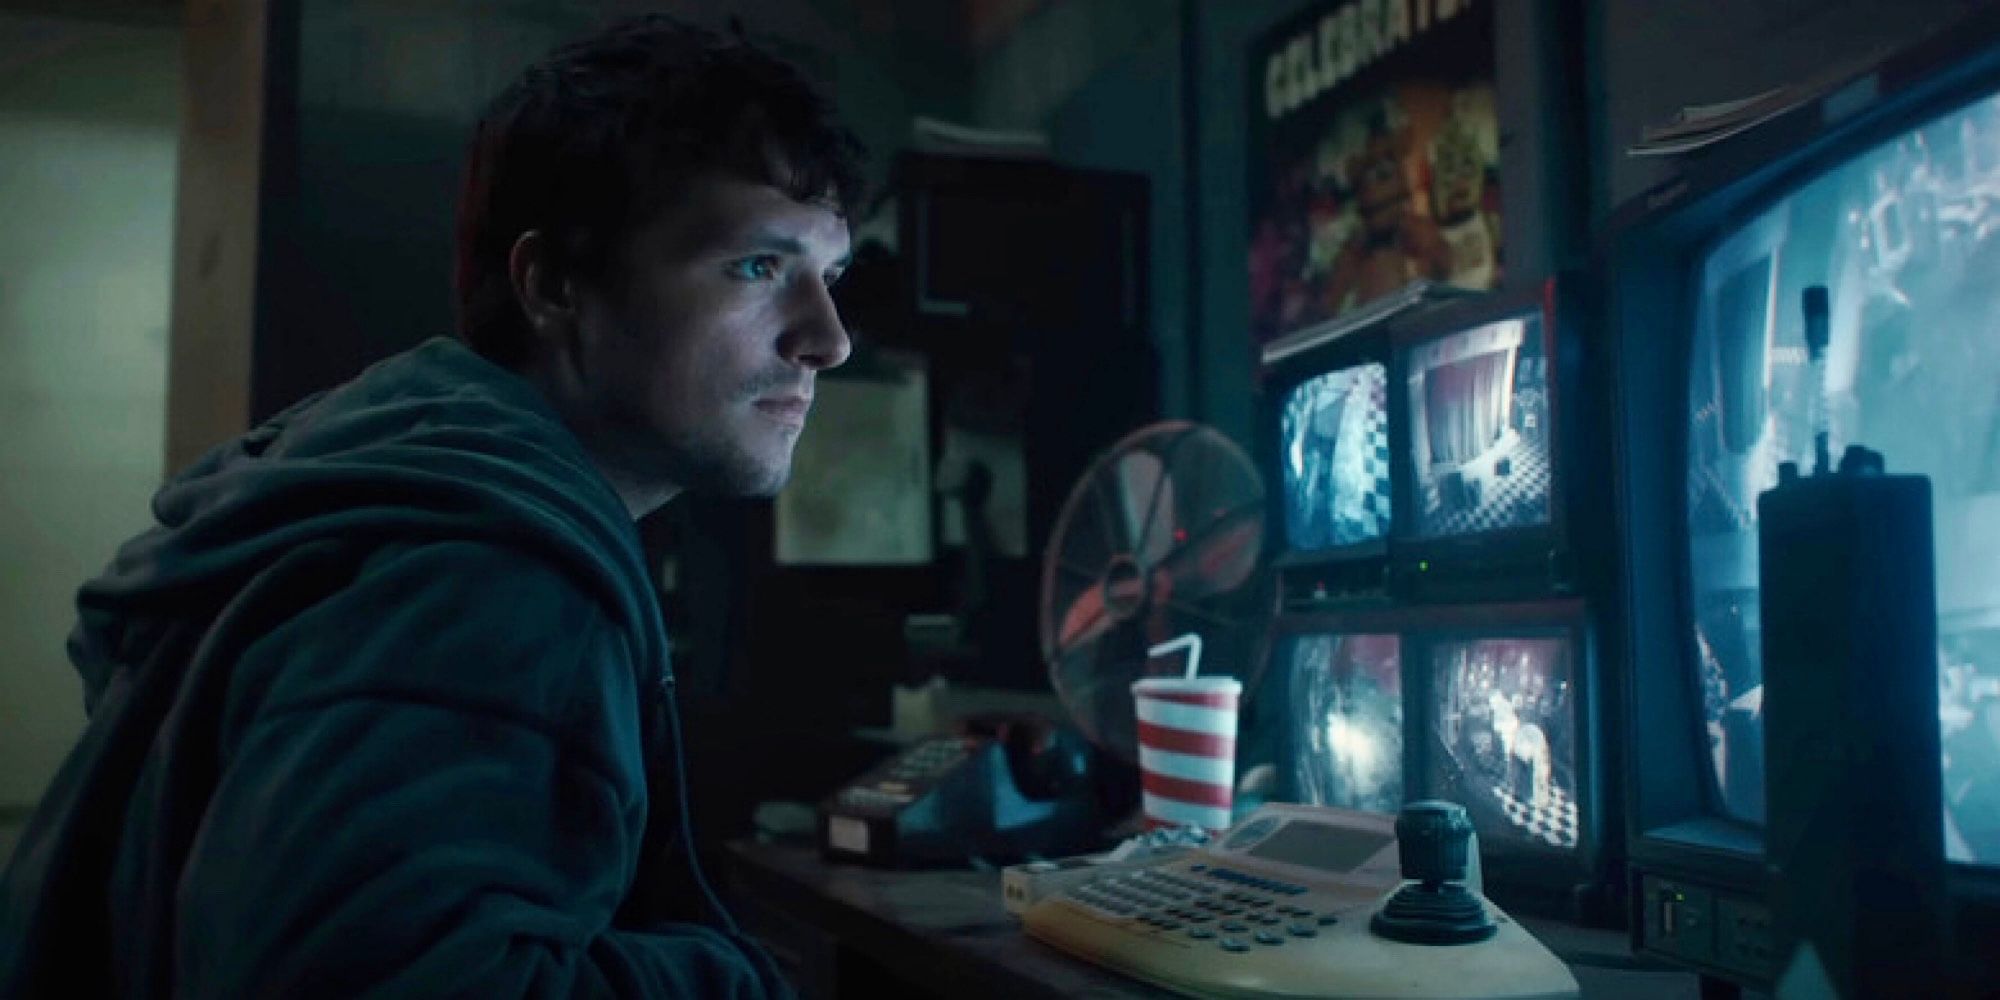 Mike (Josh Hutcherson) is looking at the monitors in Five Nights at Freddy's.